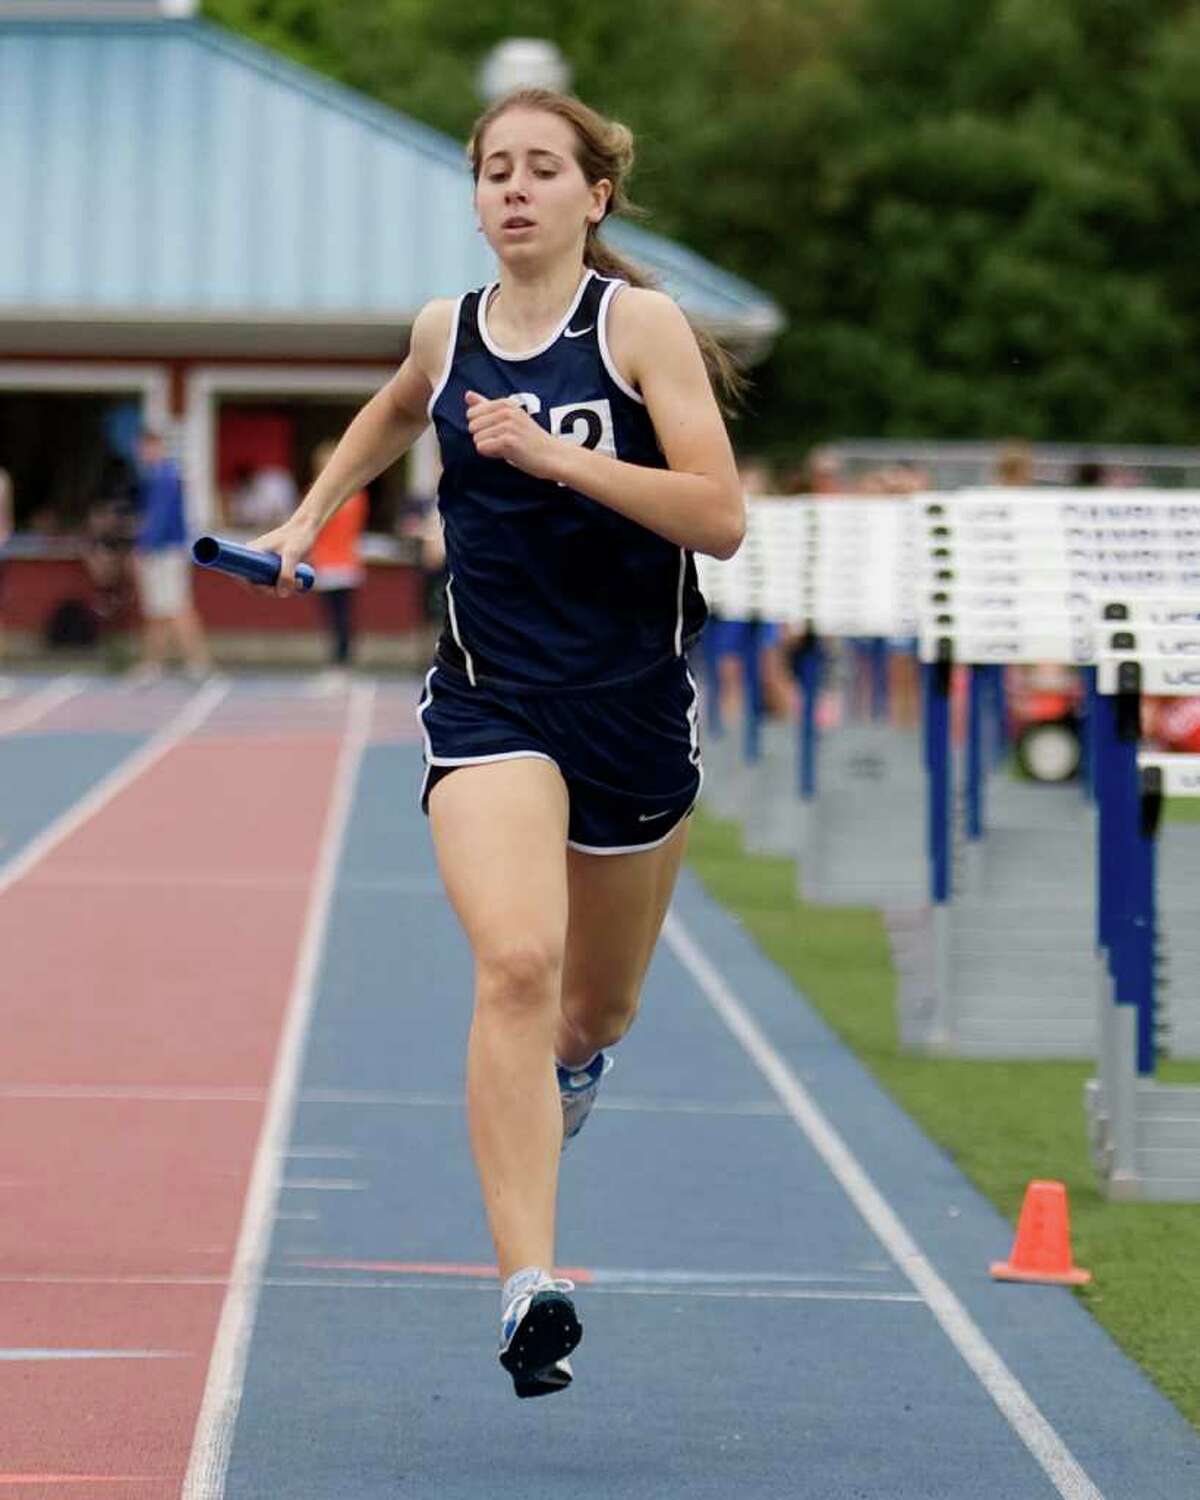 Ingrid Johnson anchors Staples' 4x800 meter relay team to victory at the FCIAC championships. Johnson is credited for helping her teammates qualify for the New England championships and will run cross country and track at Johns Hopkins University.